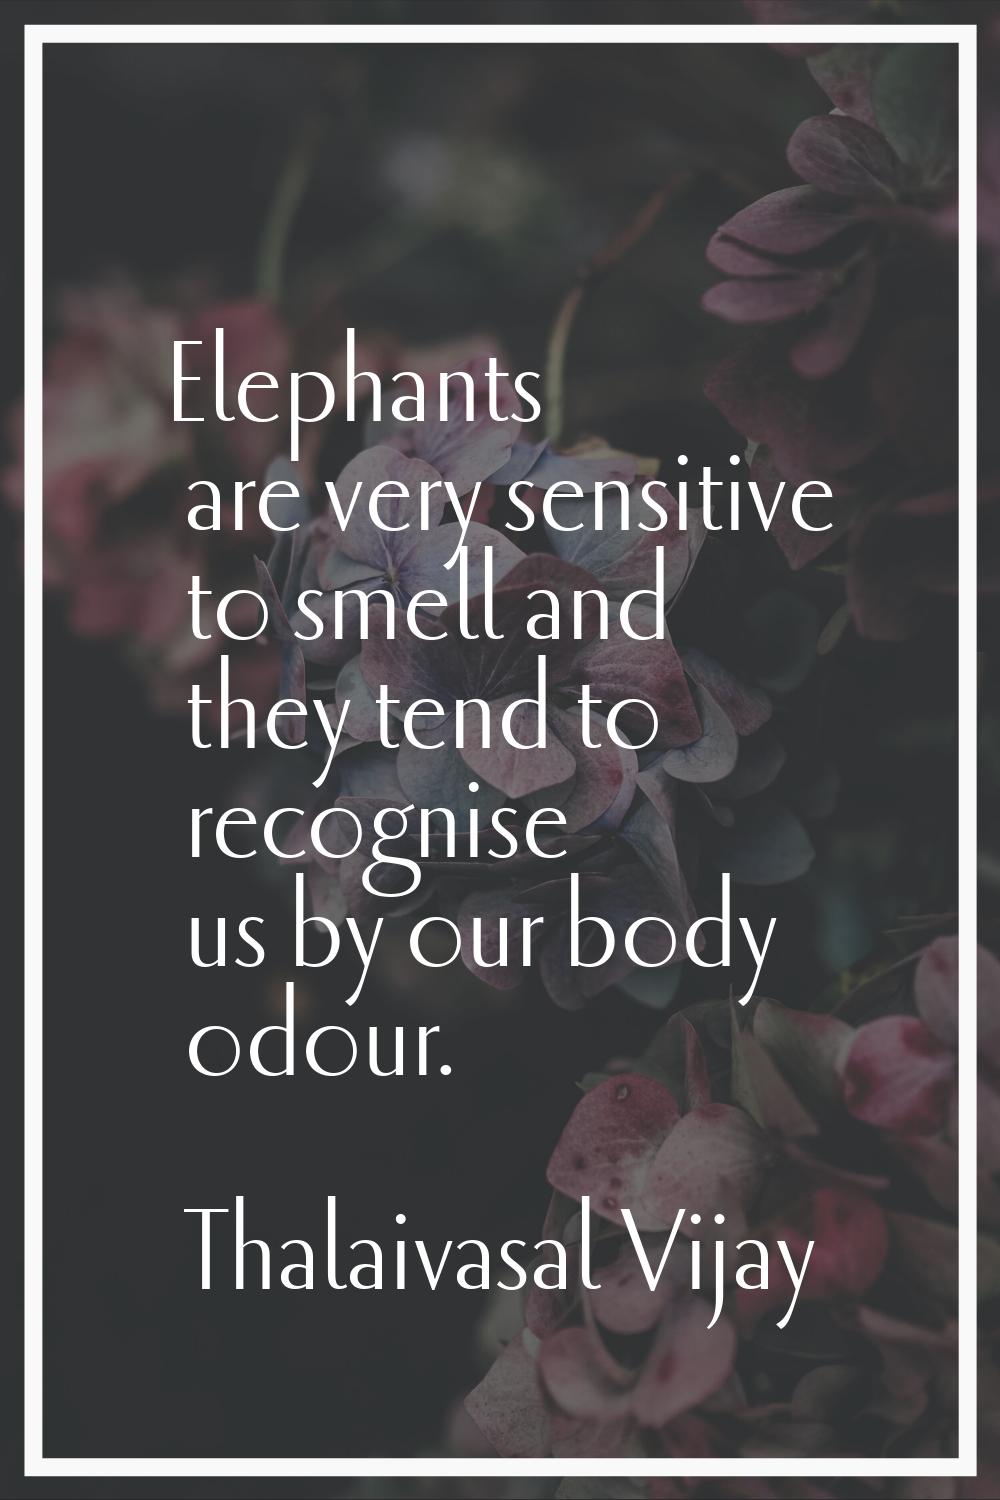 Elephants are very sensitive to smell and they tend to recognise us by our body odour.